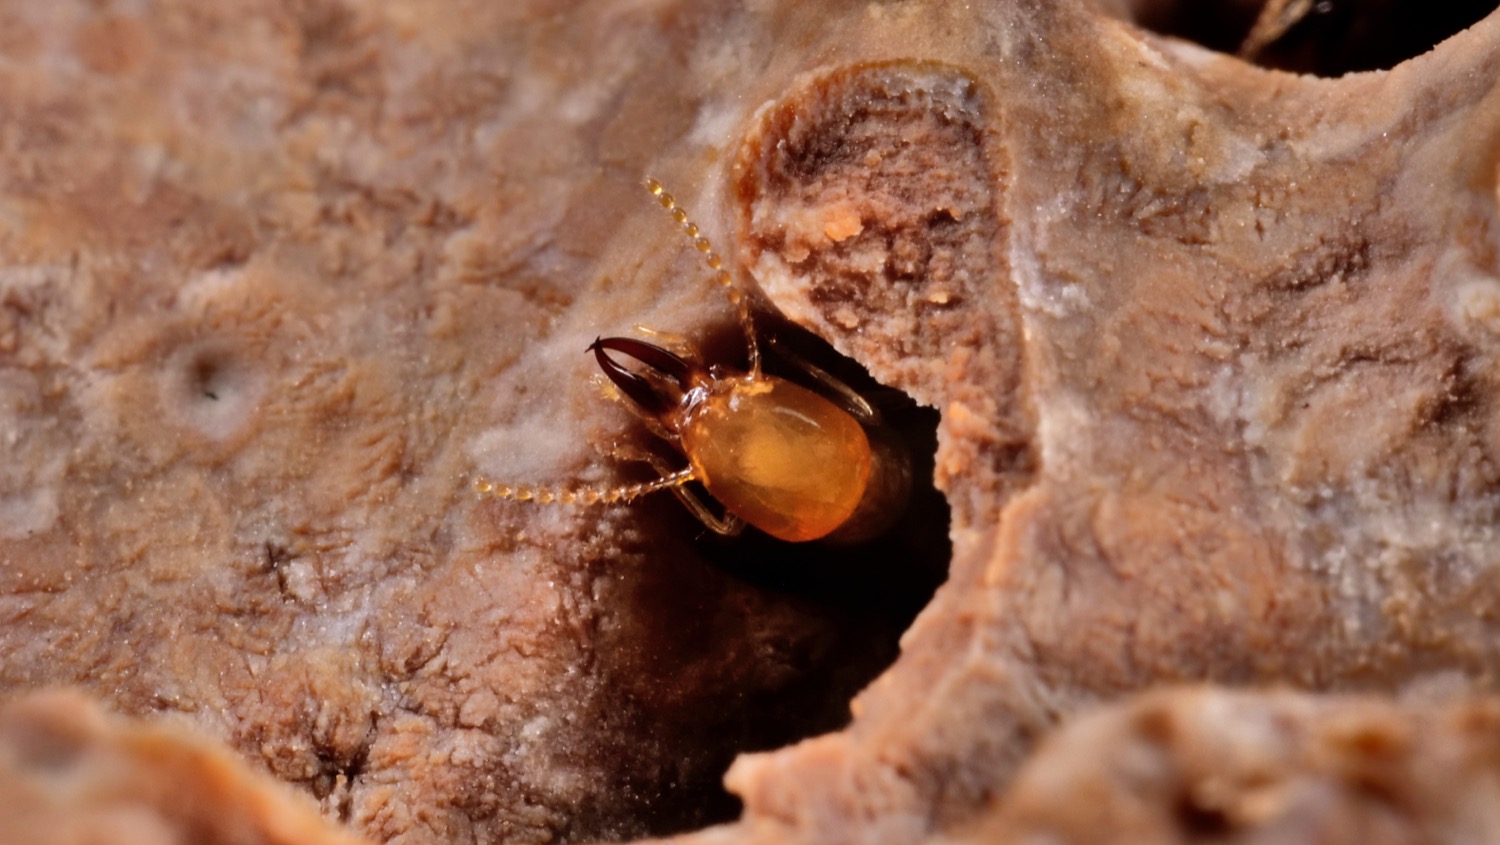 a termite's head is seen poking out from a channel in wood